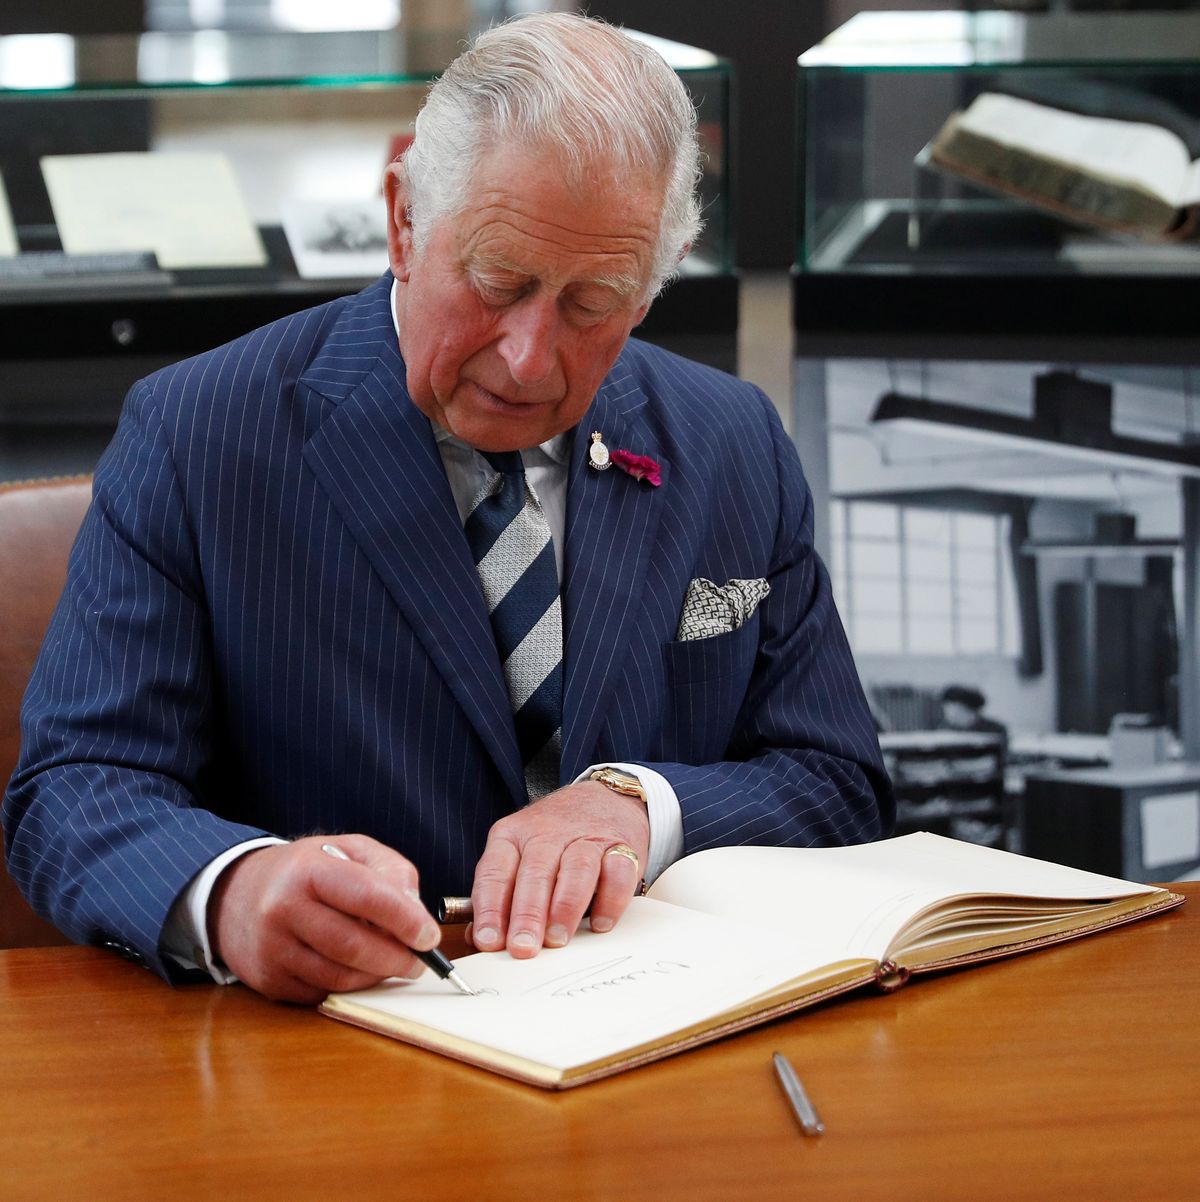 The Prince Of Wales Visits The Headquarters of GCHQ